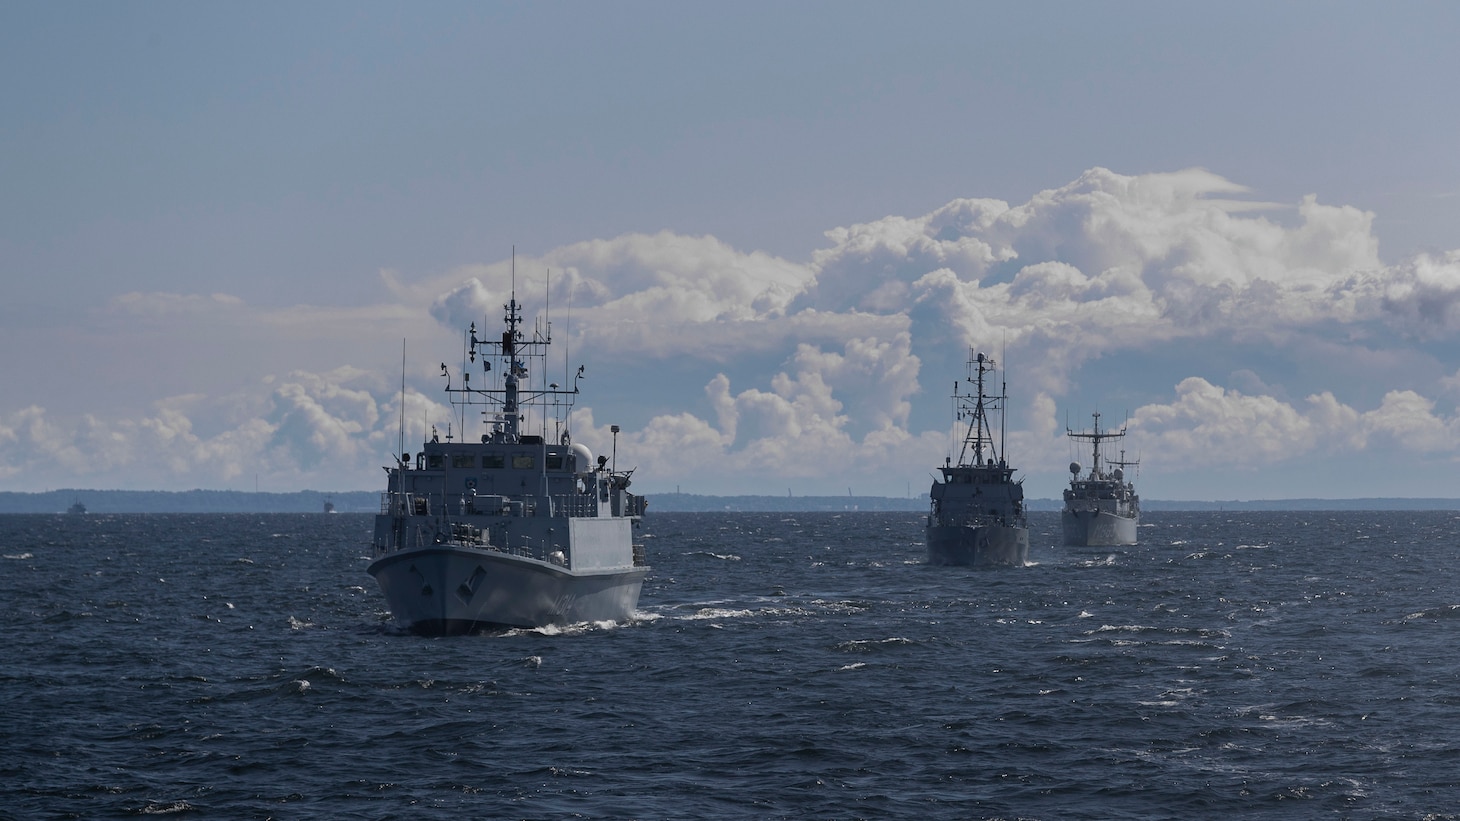 230604-N-N0901-3001 BALTIC SEA (June 4, 2023) NATO and Swedish ships steam in formation after departing Tallinn, Estonia, June 4, 2023, to participate in exercise Baltic Operations 2023 (BALTOPS 23). BALTOPS 23 is the premier maritime-focused exercise in the Baltic Region. The exercise, led by U.S. Naval Forces Europe-Africa and executed by Naval Striking and Support Forces NATO provides a unique training opportunity to strengthen the combined response capability critical to preserving the freedom of navigation and security in the Baltic Sea. (Courtesy Photo provided by OR-7 Aaron Zwaal, Royal Netherlands Airforce)